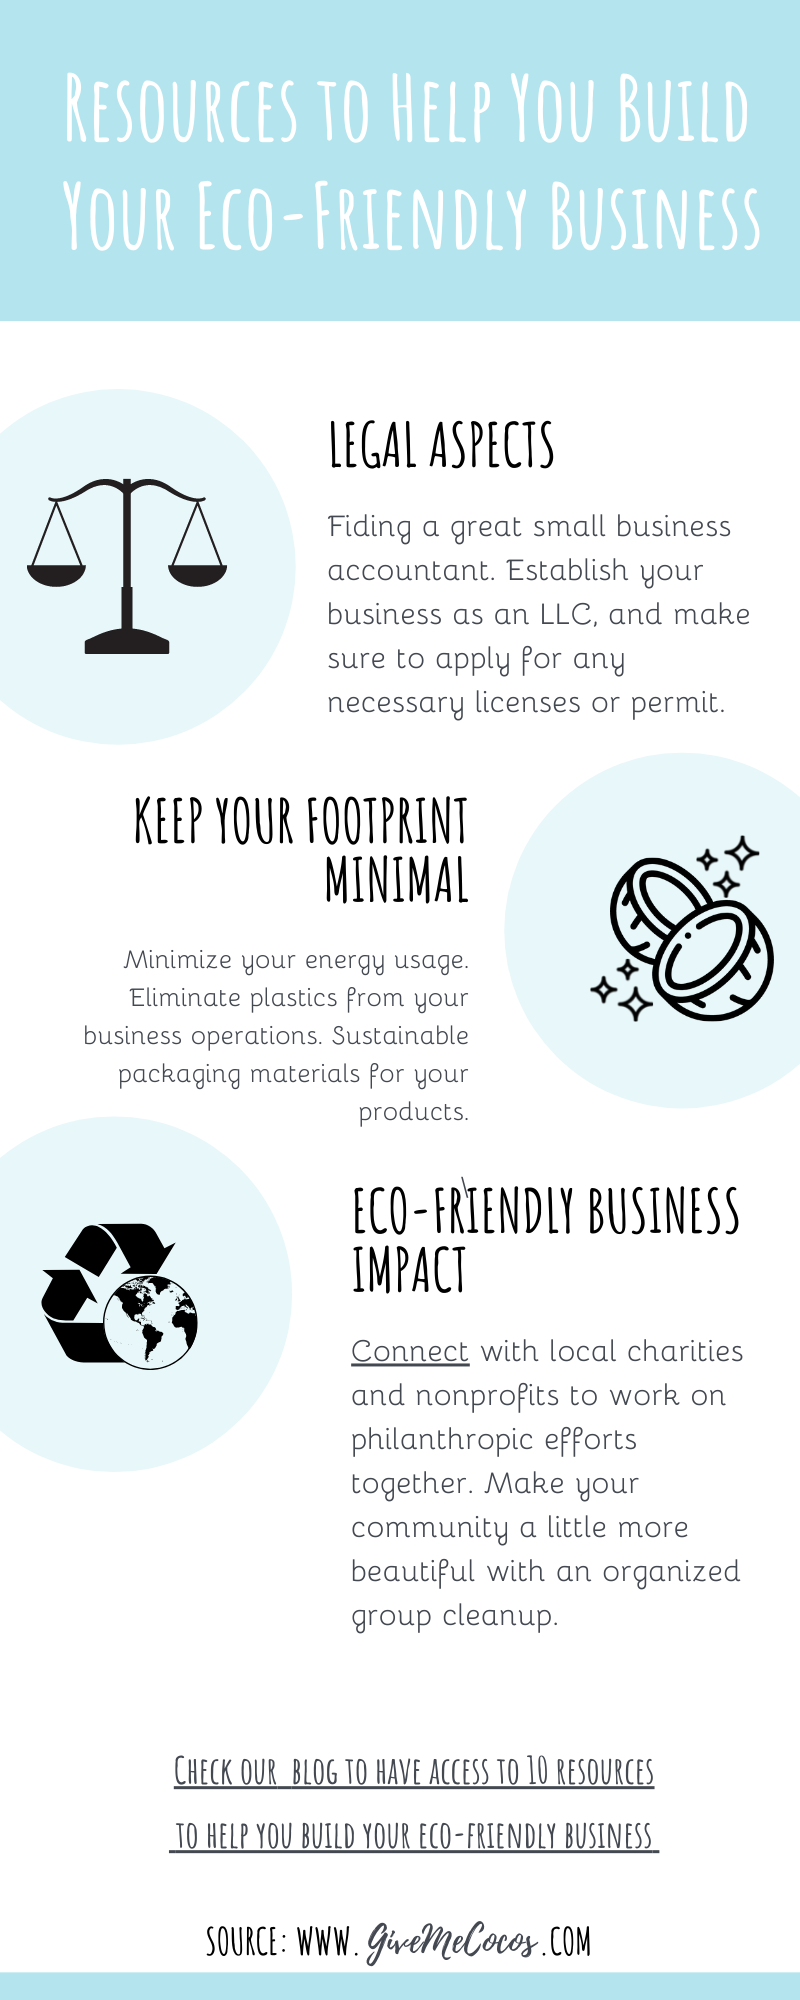 How To Build An Eco-Friendly Business